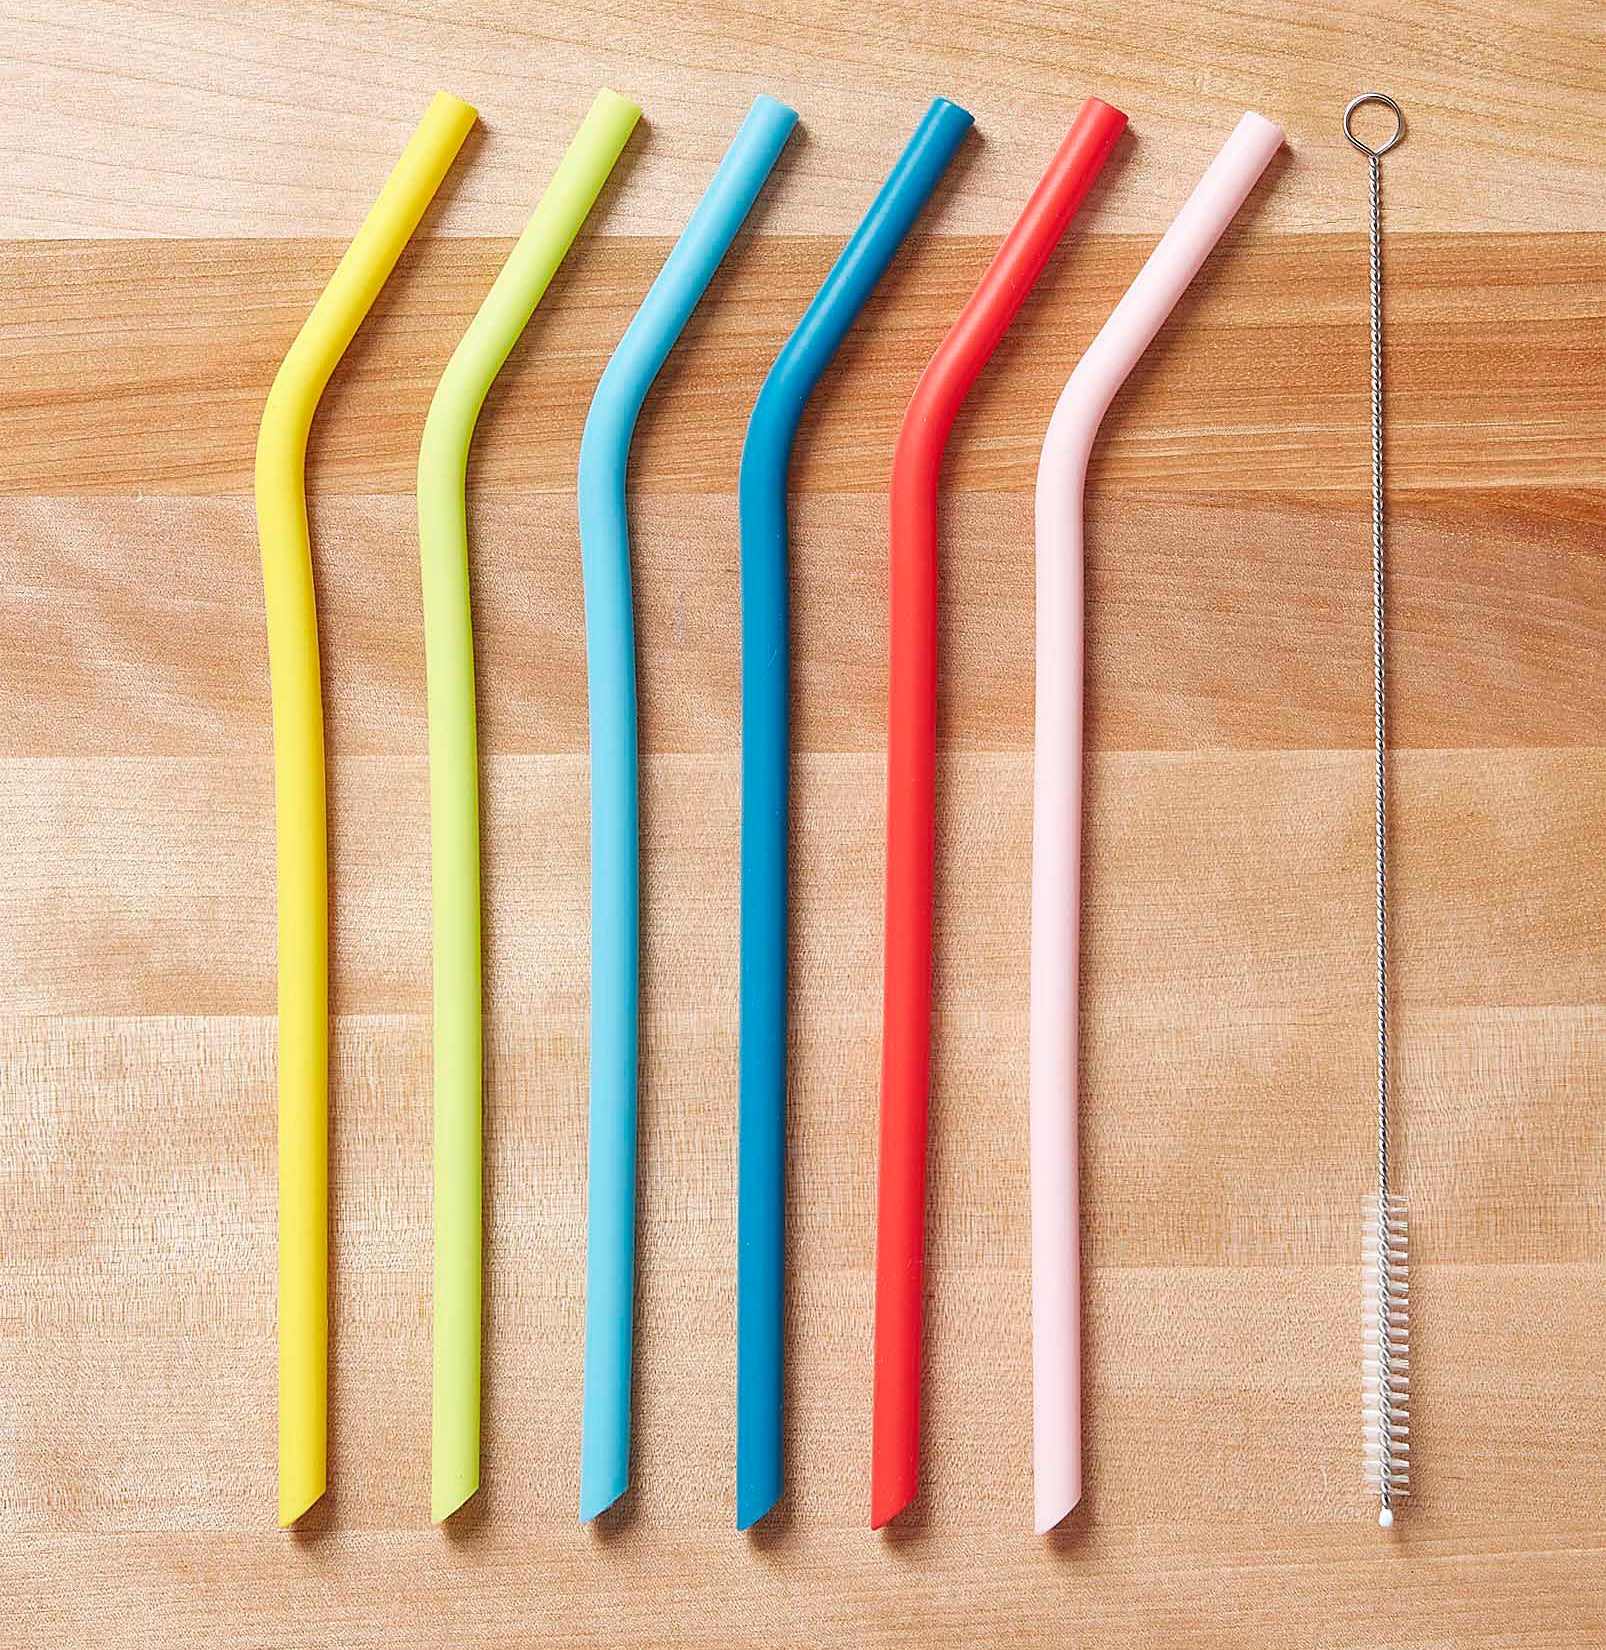 The six straws and their cleaning brush on a table